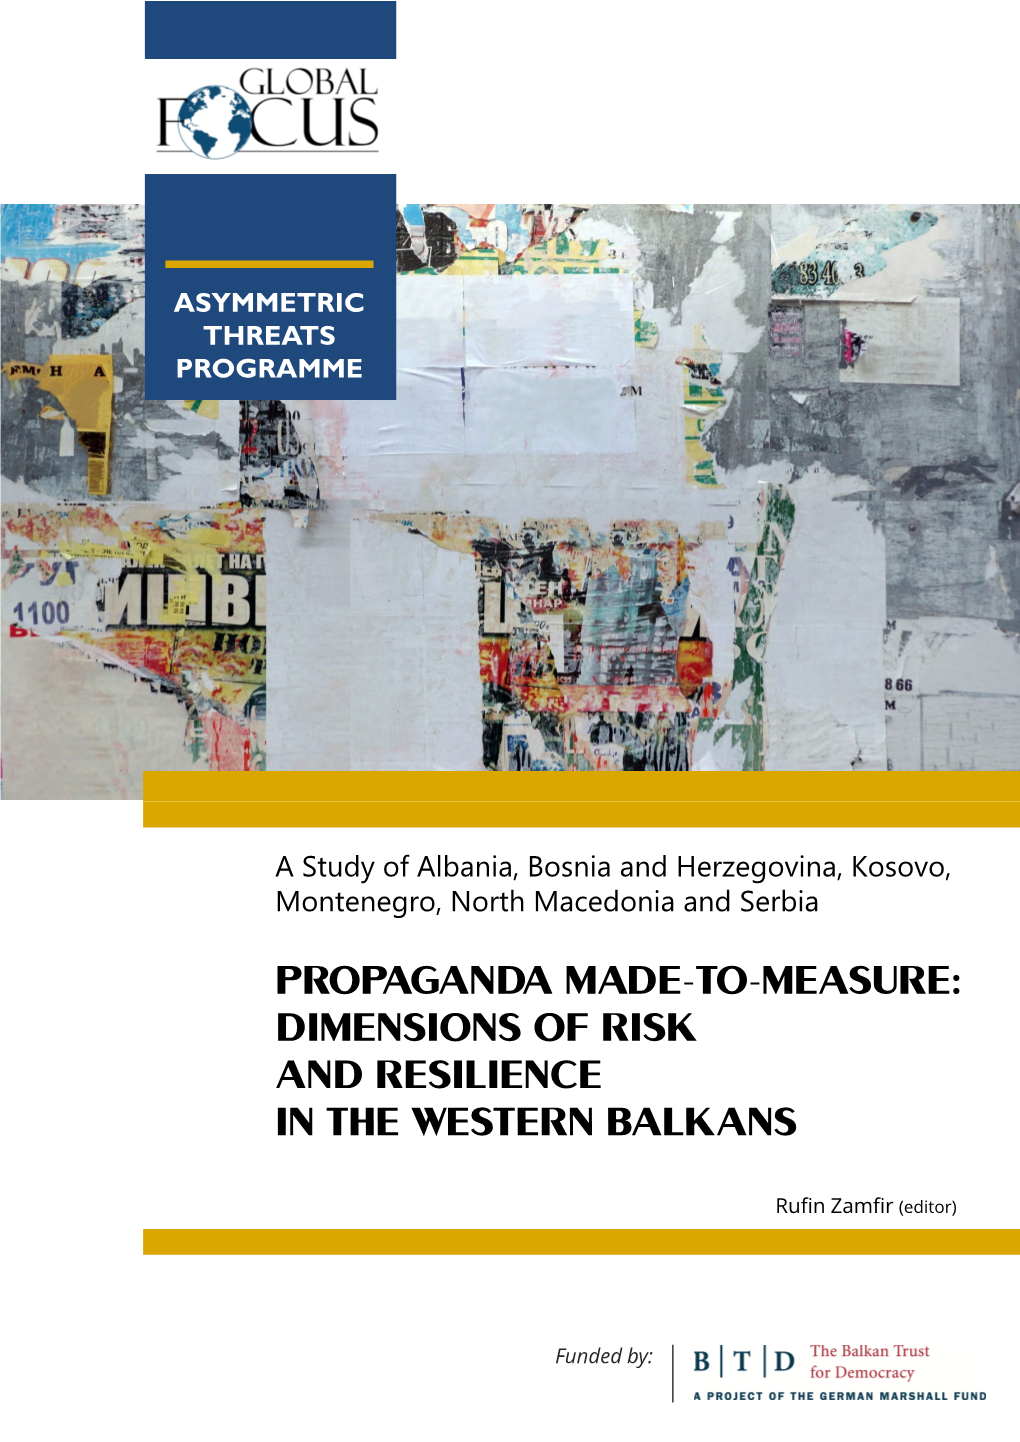 Propaganda Made-To-Measure: Dimensions of Risk and Resilience in the Western Balkans